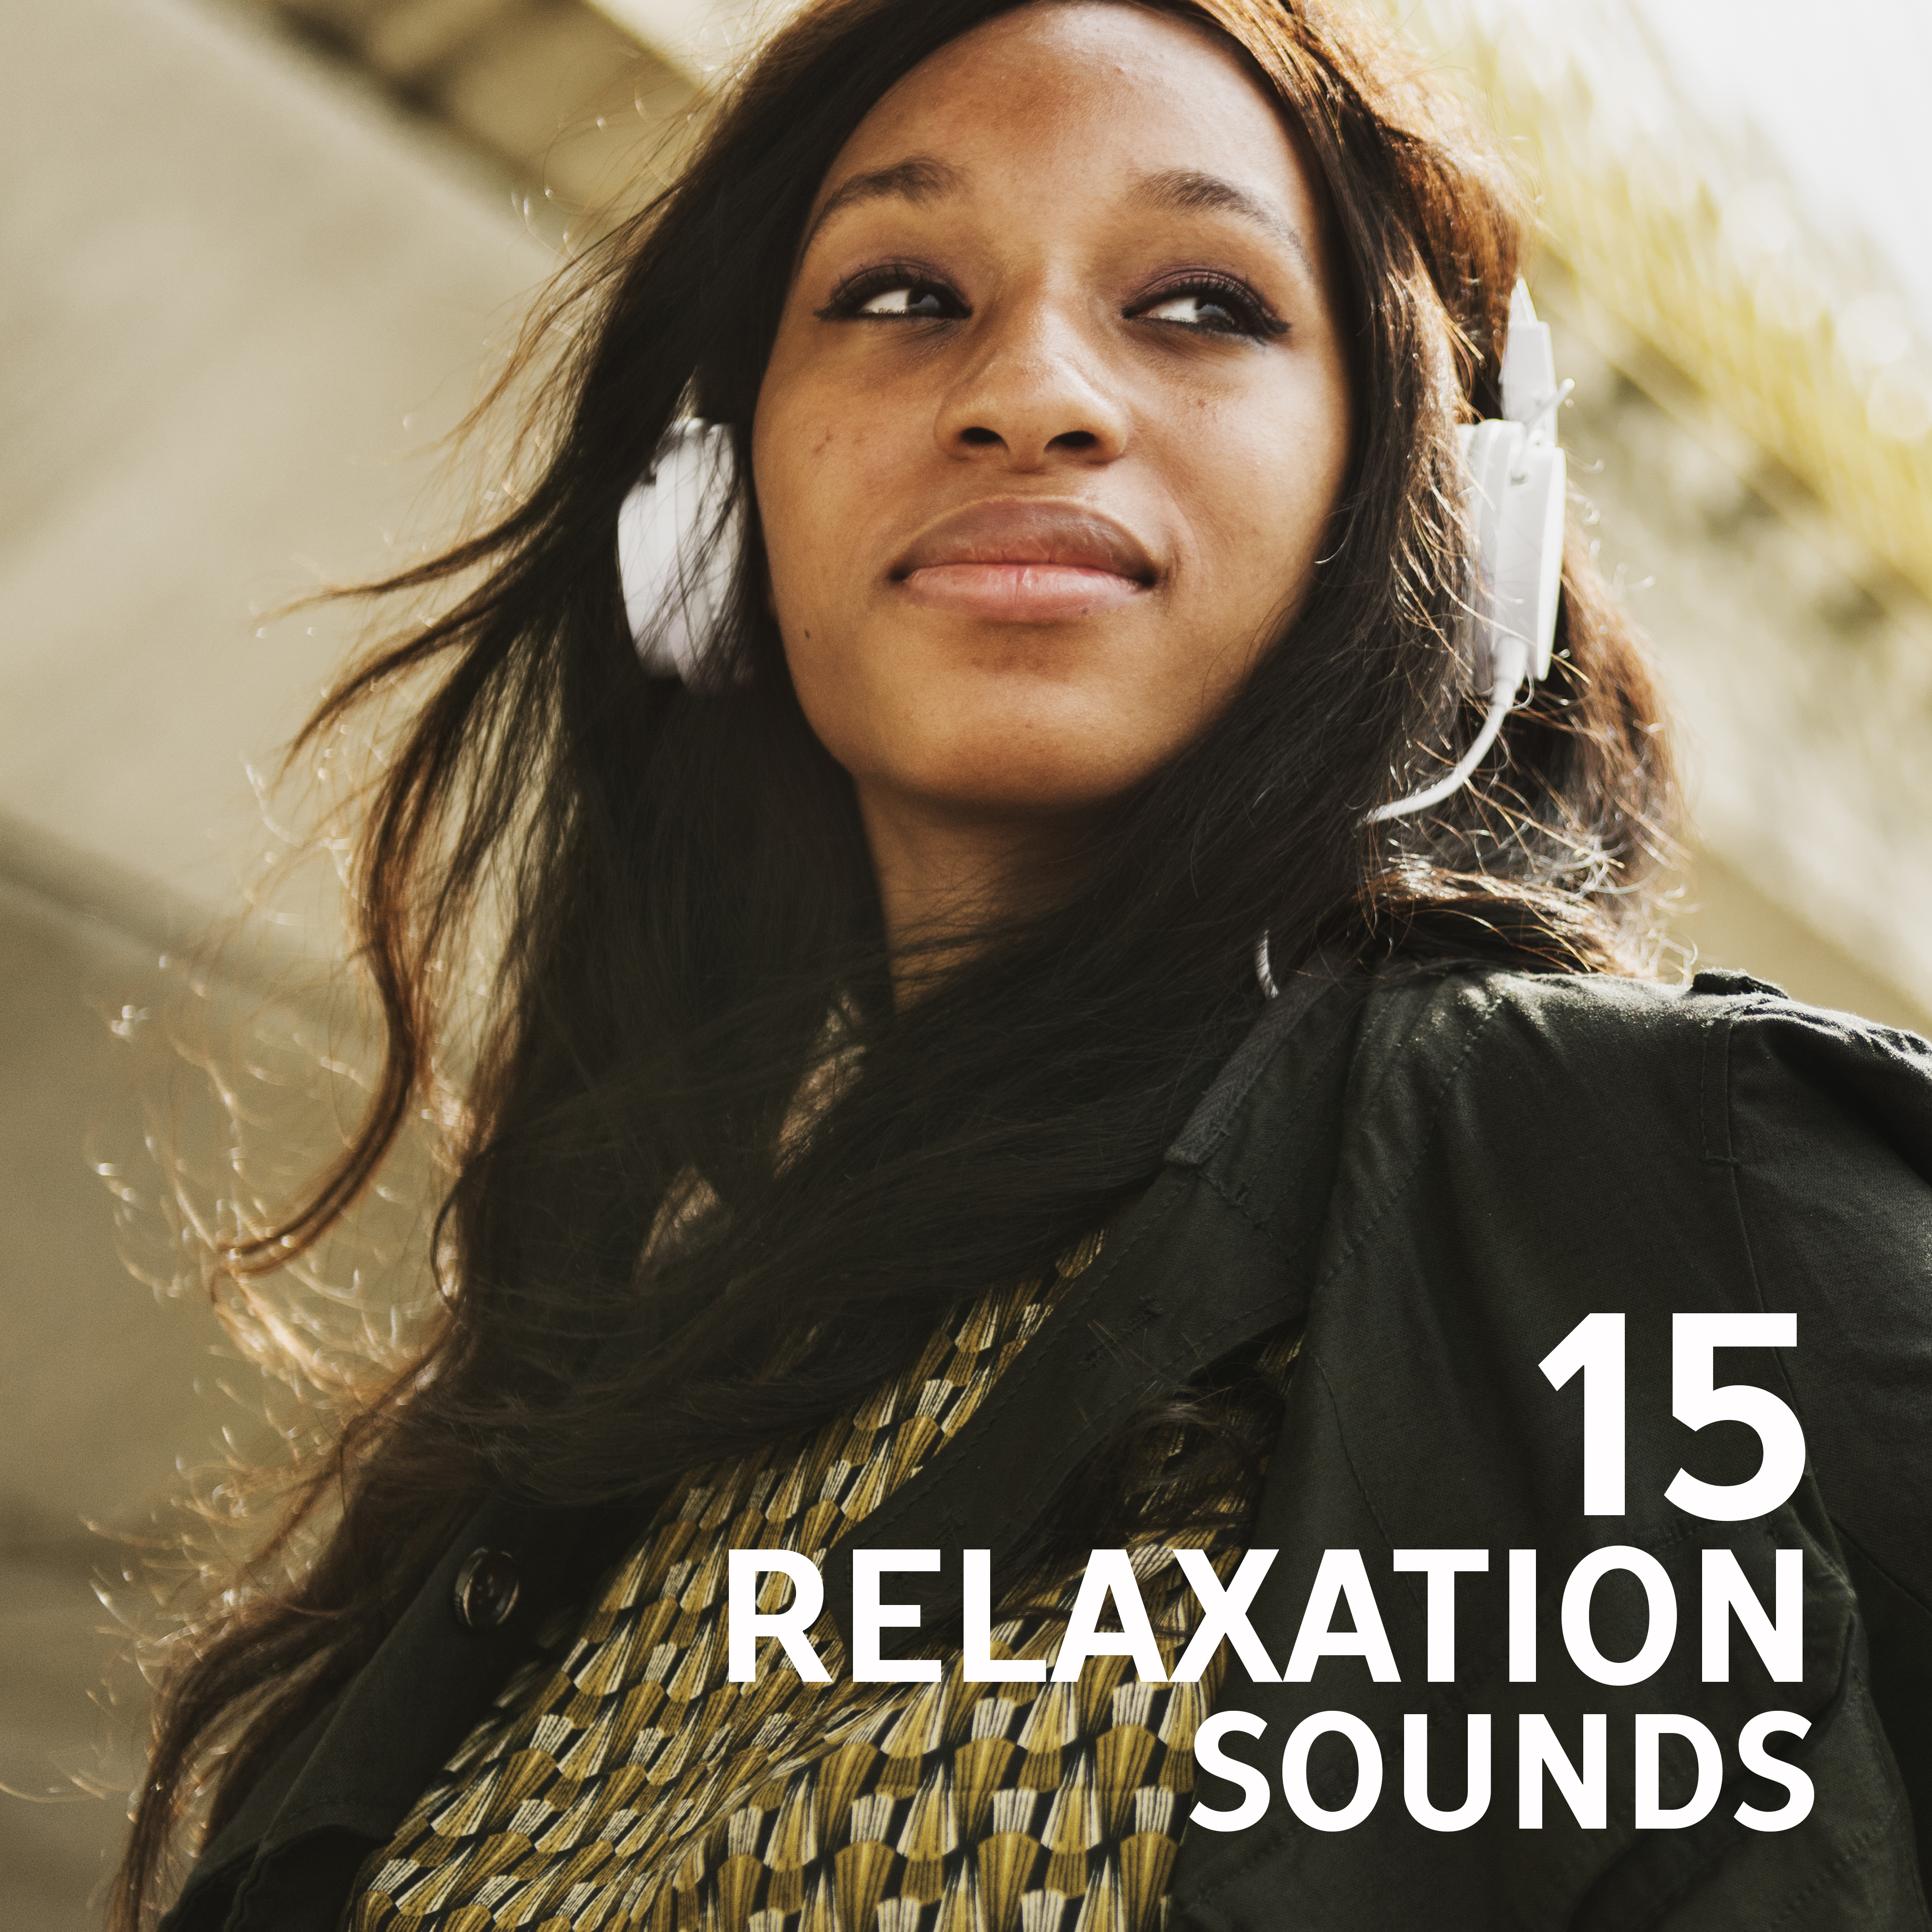 15 Relaxation Sounds